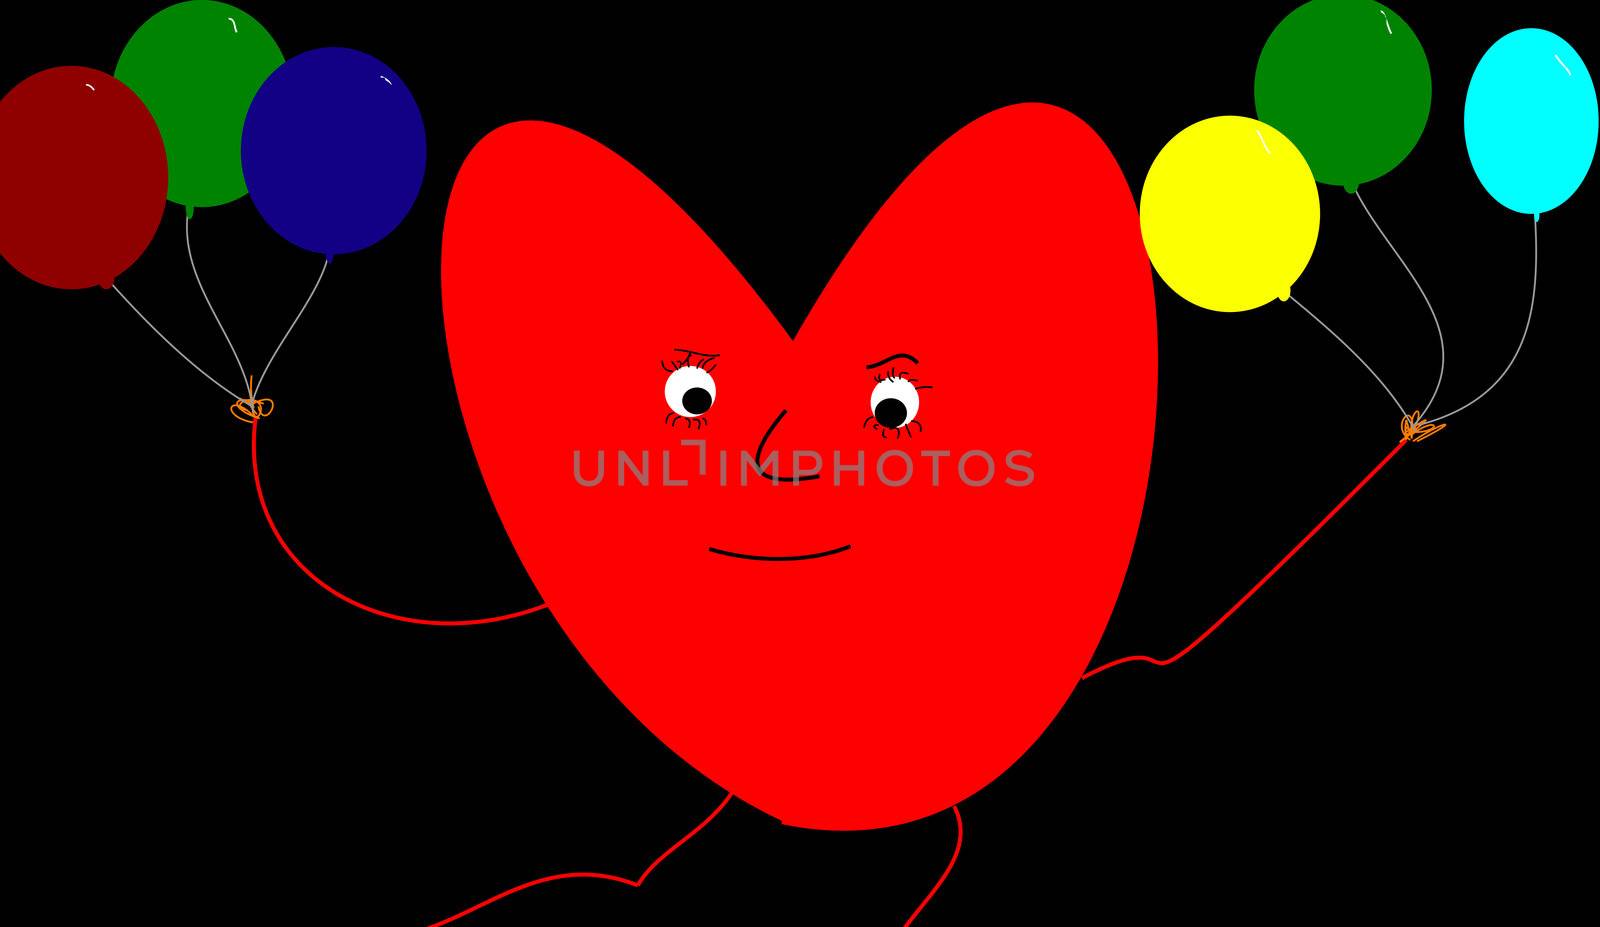 the heart with balls on black background